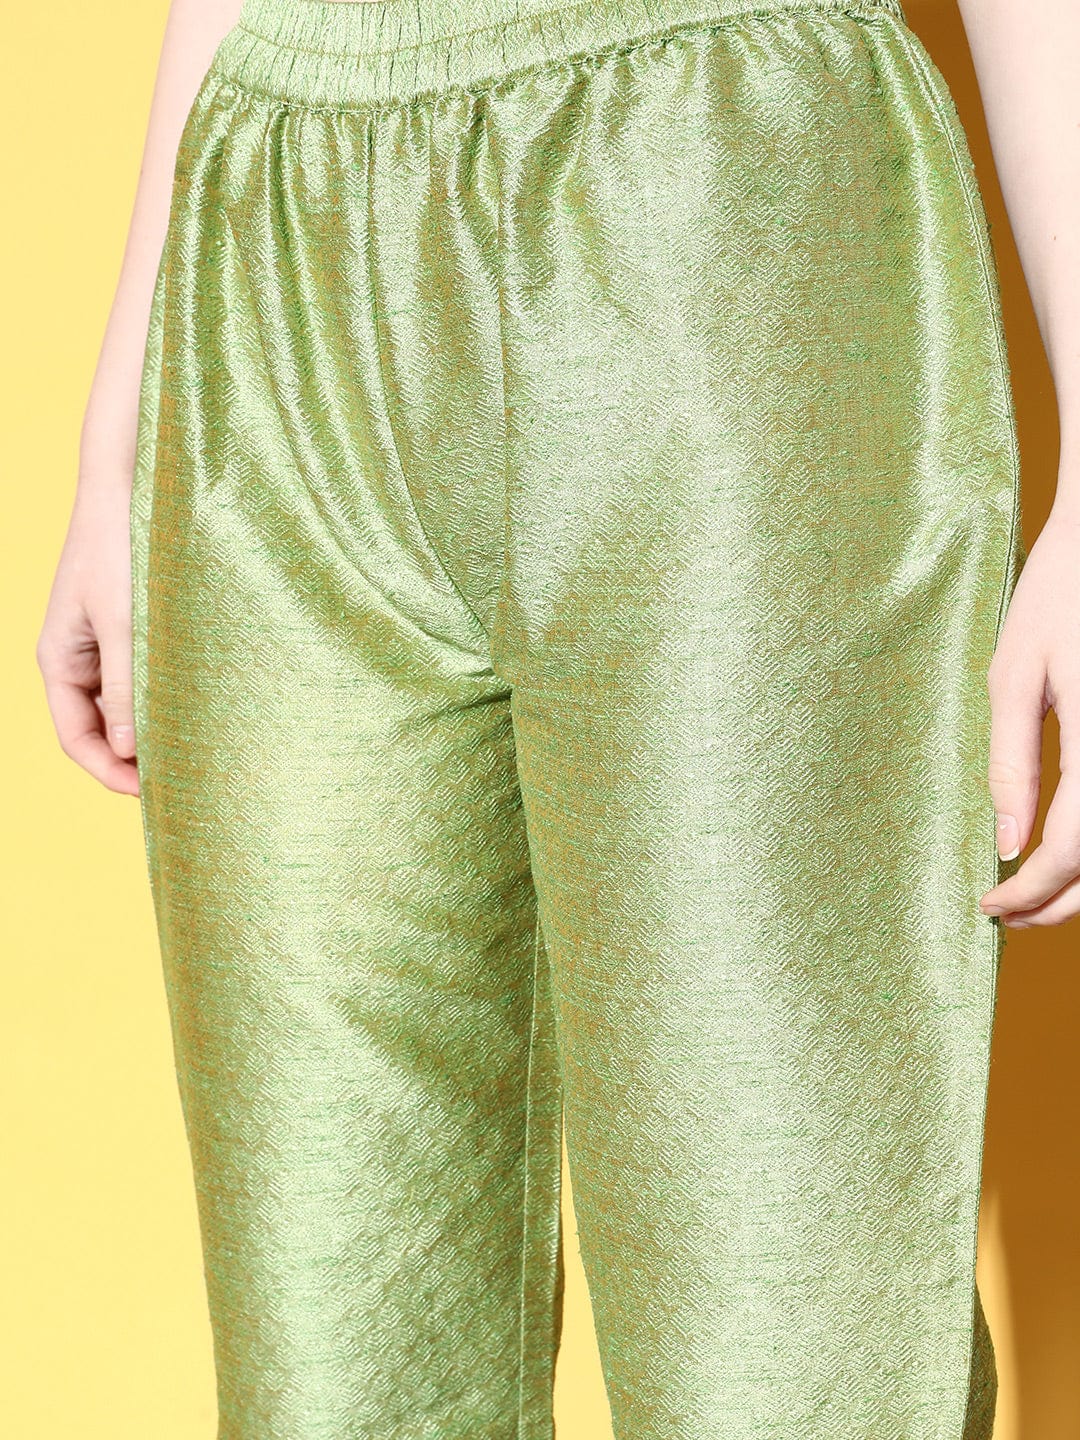 Printed Ethnic Trousers For Women  Buy Printed Ethnic Trousers For Women  online in India